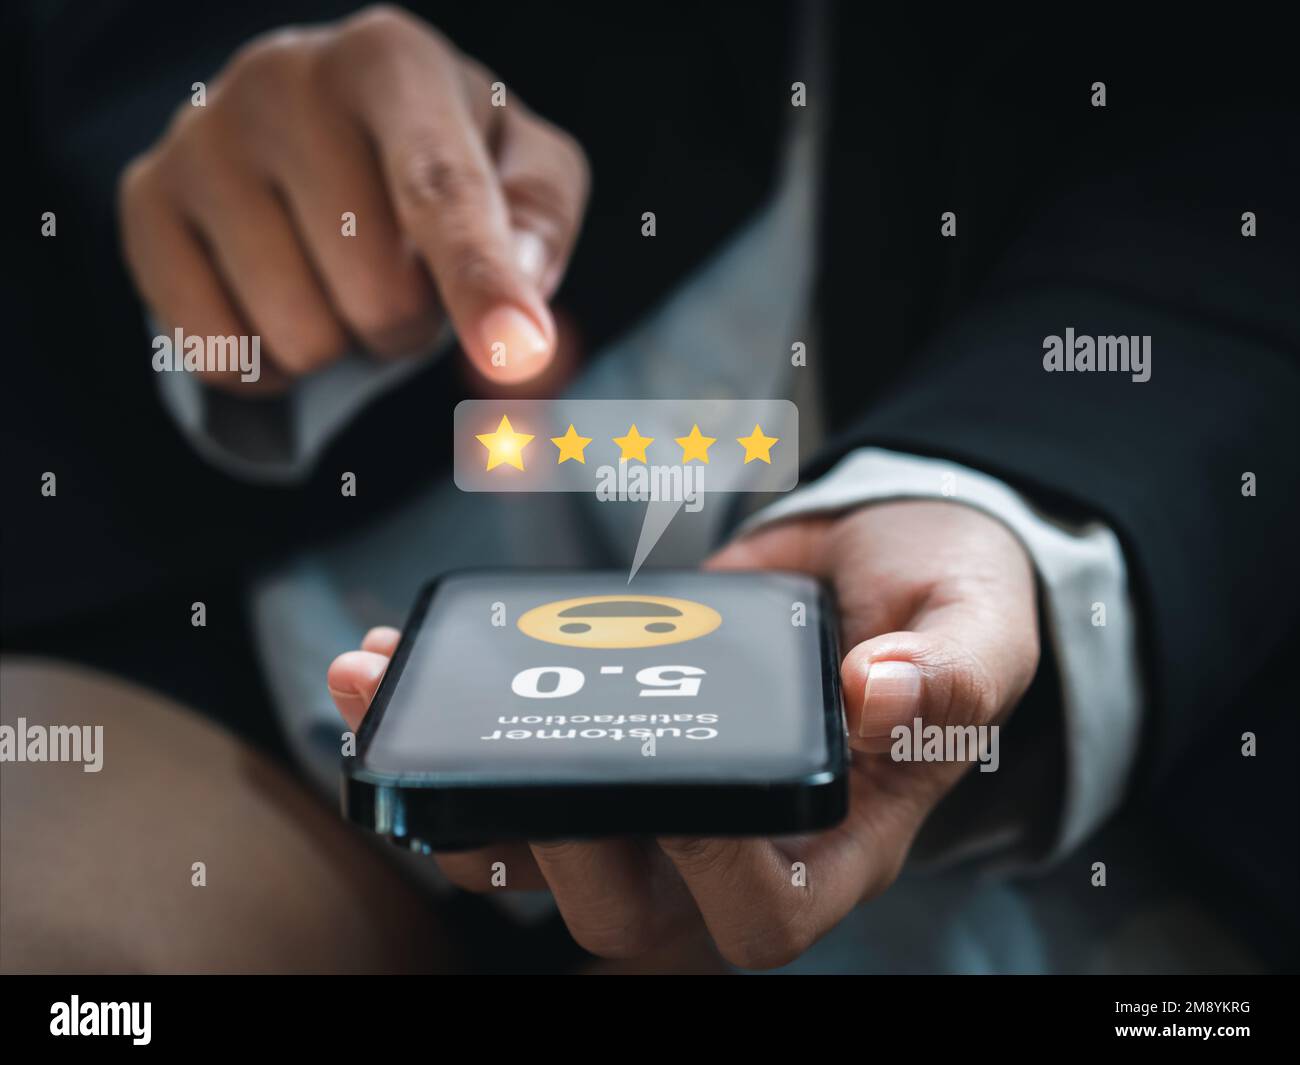 Customer review, satisfaction, feedback, survey concepts. The User giving 5 stars point rating with smile face icon to service experience, business ra Stock Photo